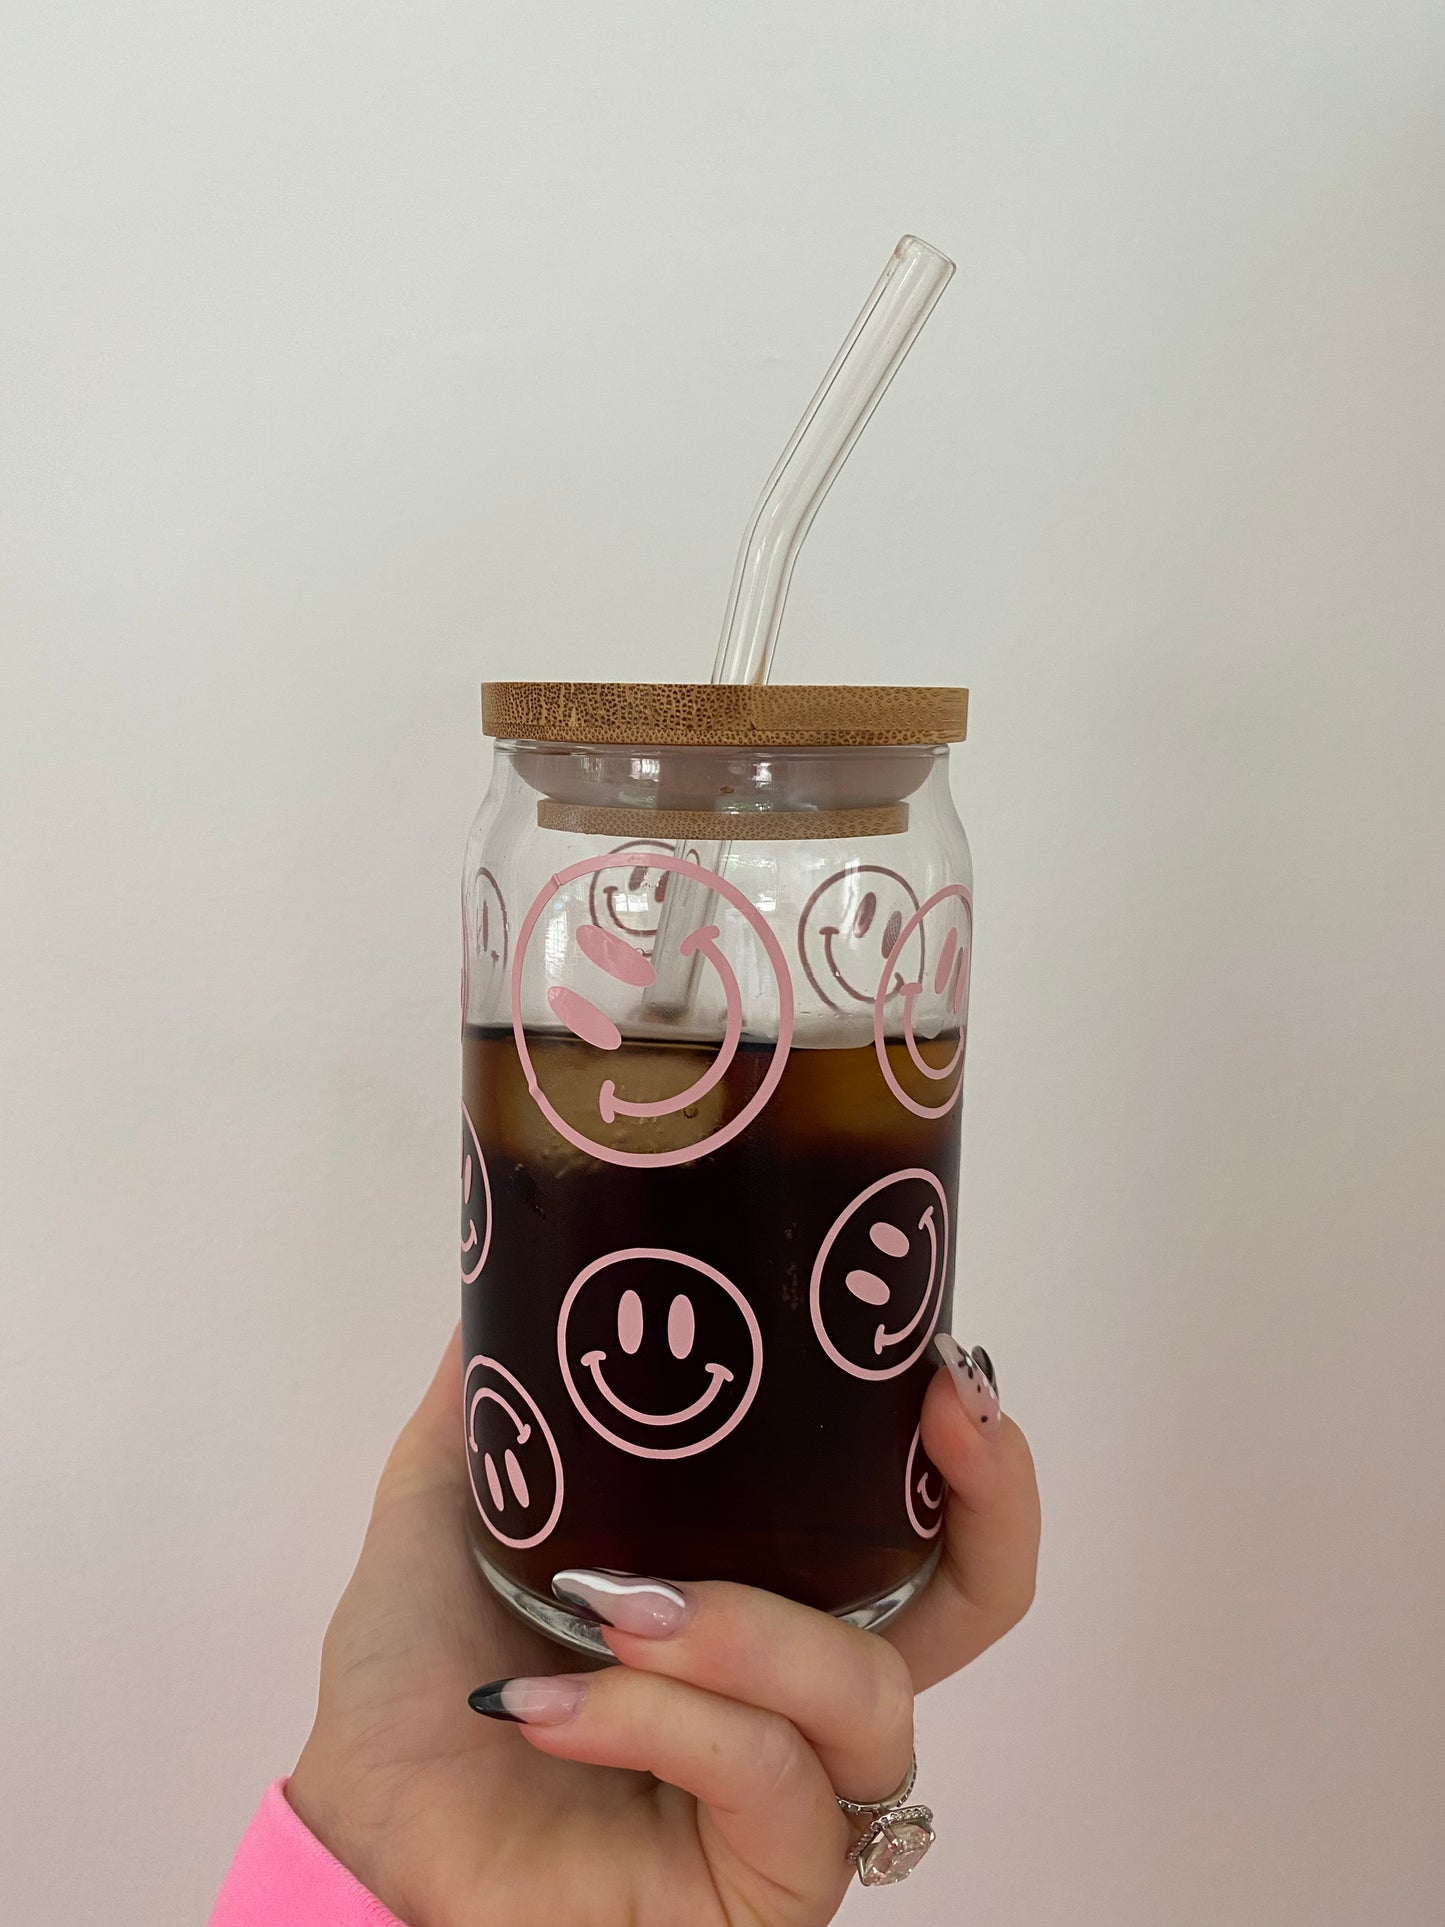 Pink Cup of Happy Smiley Iced Coffee Glass